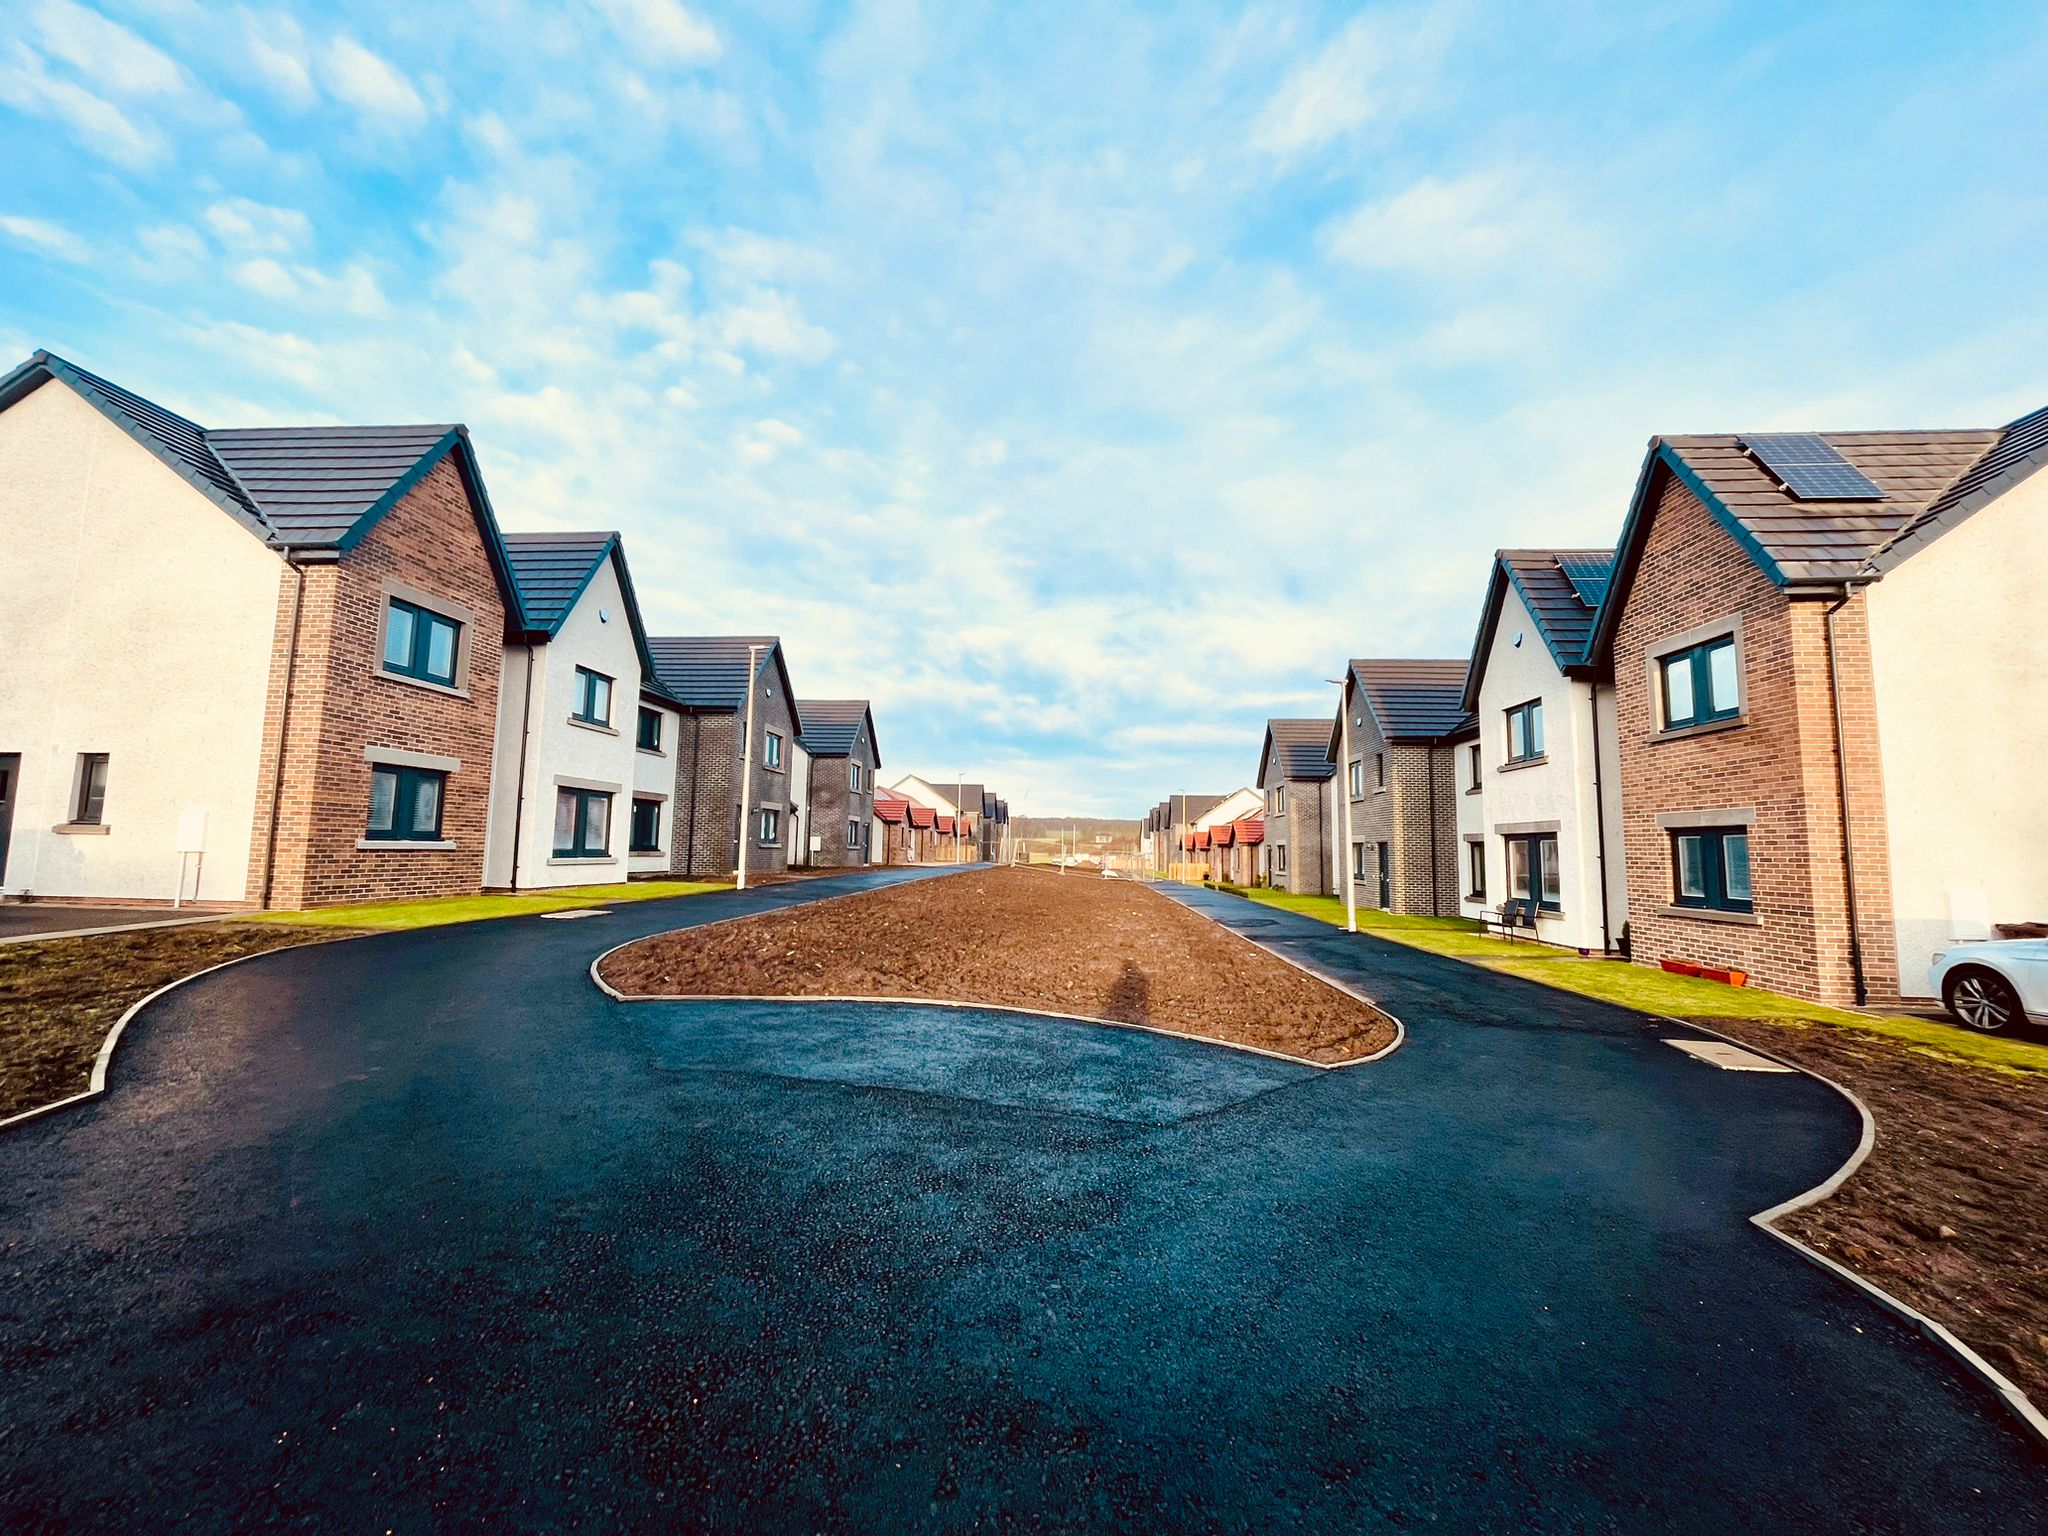 Easy Living Homes unveils new 80-home development in Fife village